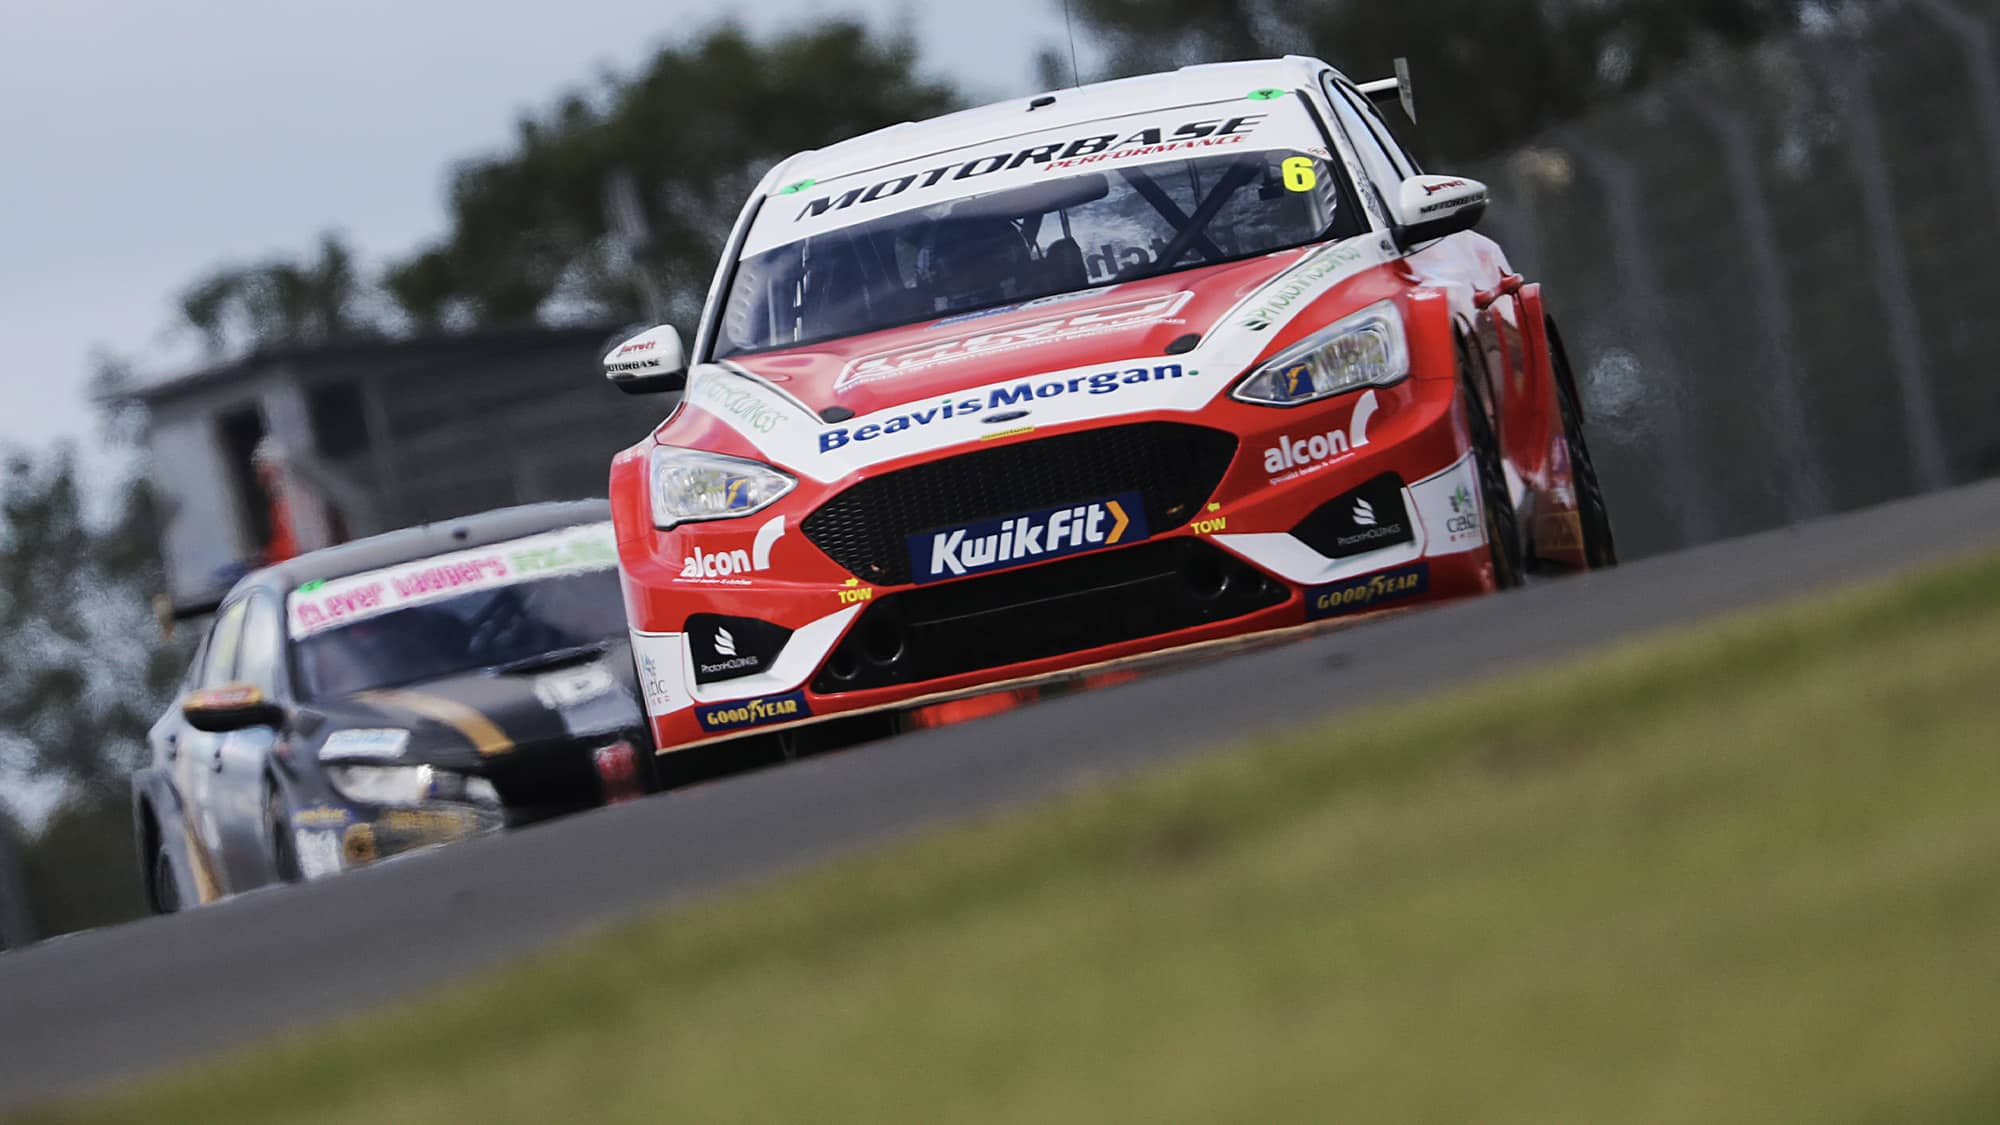 Rory Butcher in the opening rounds of the 2020 BTCC championship